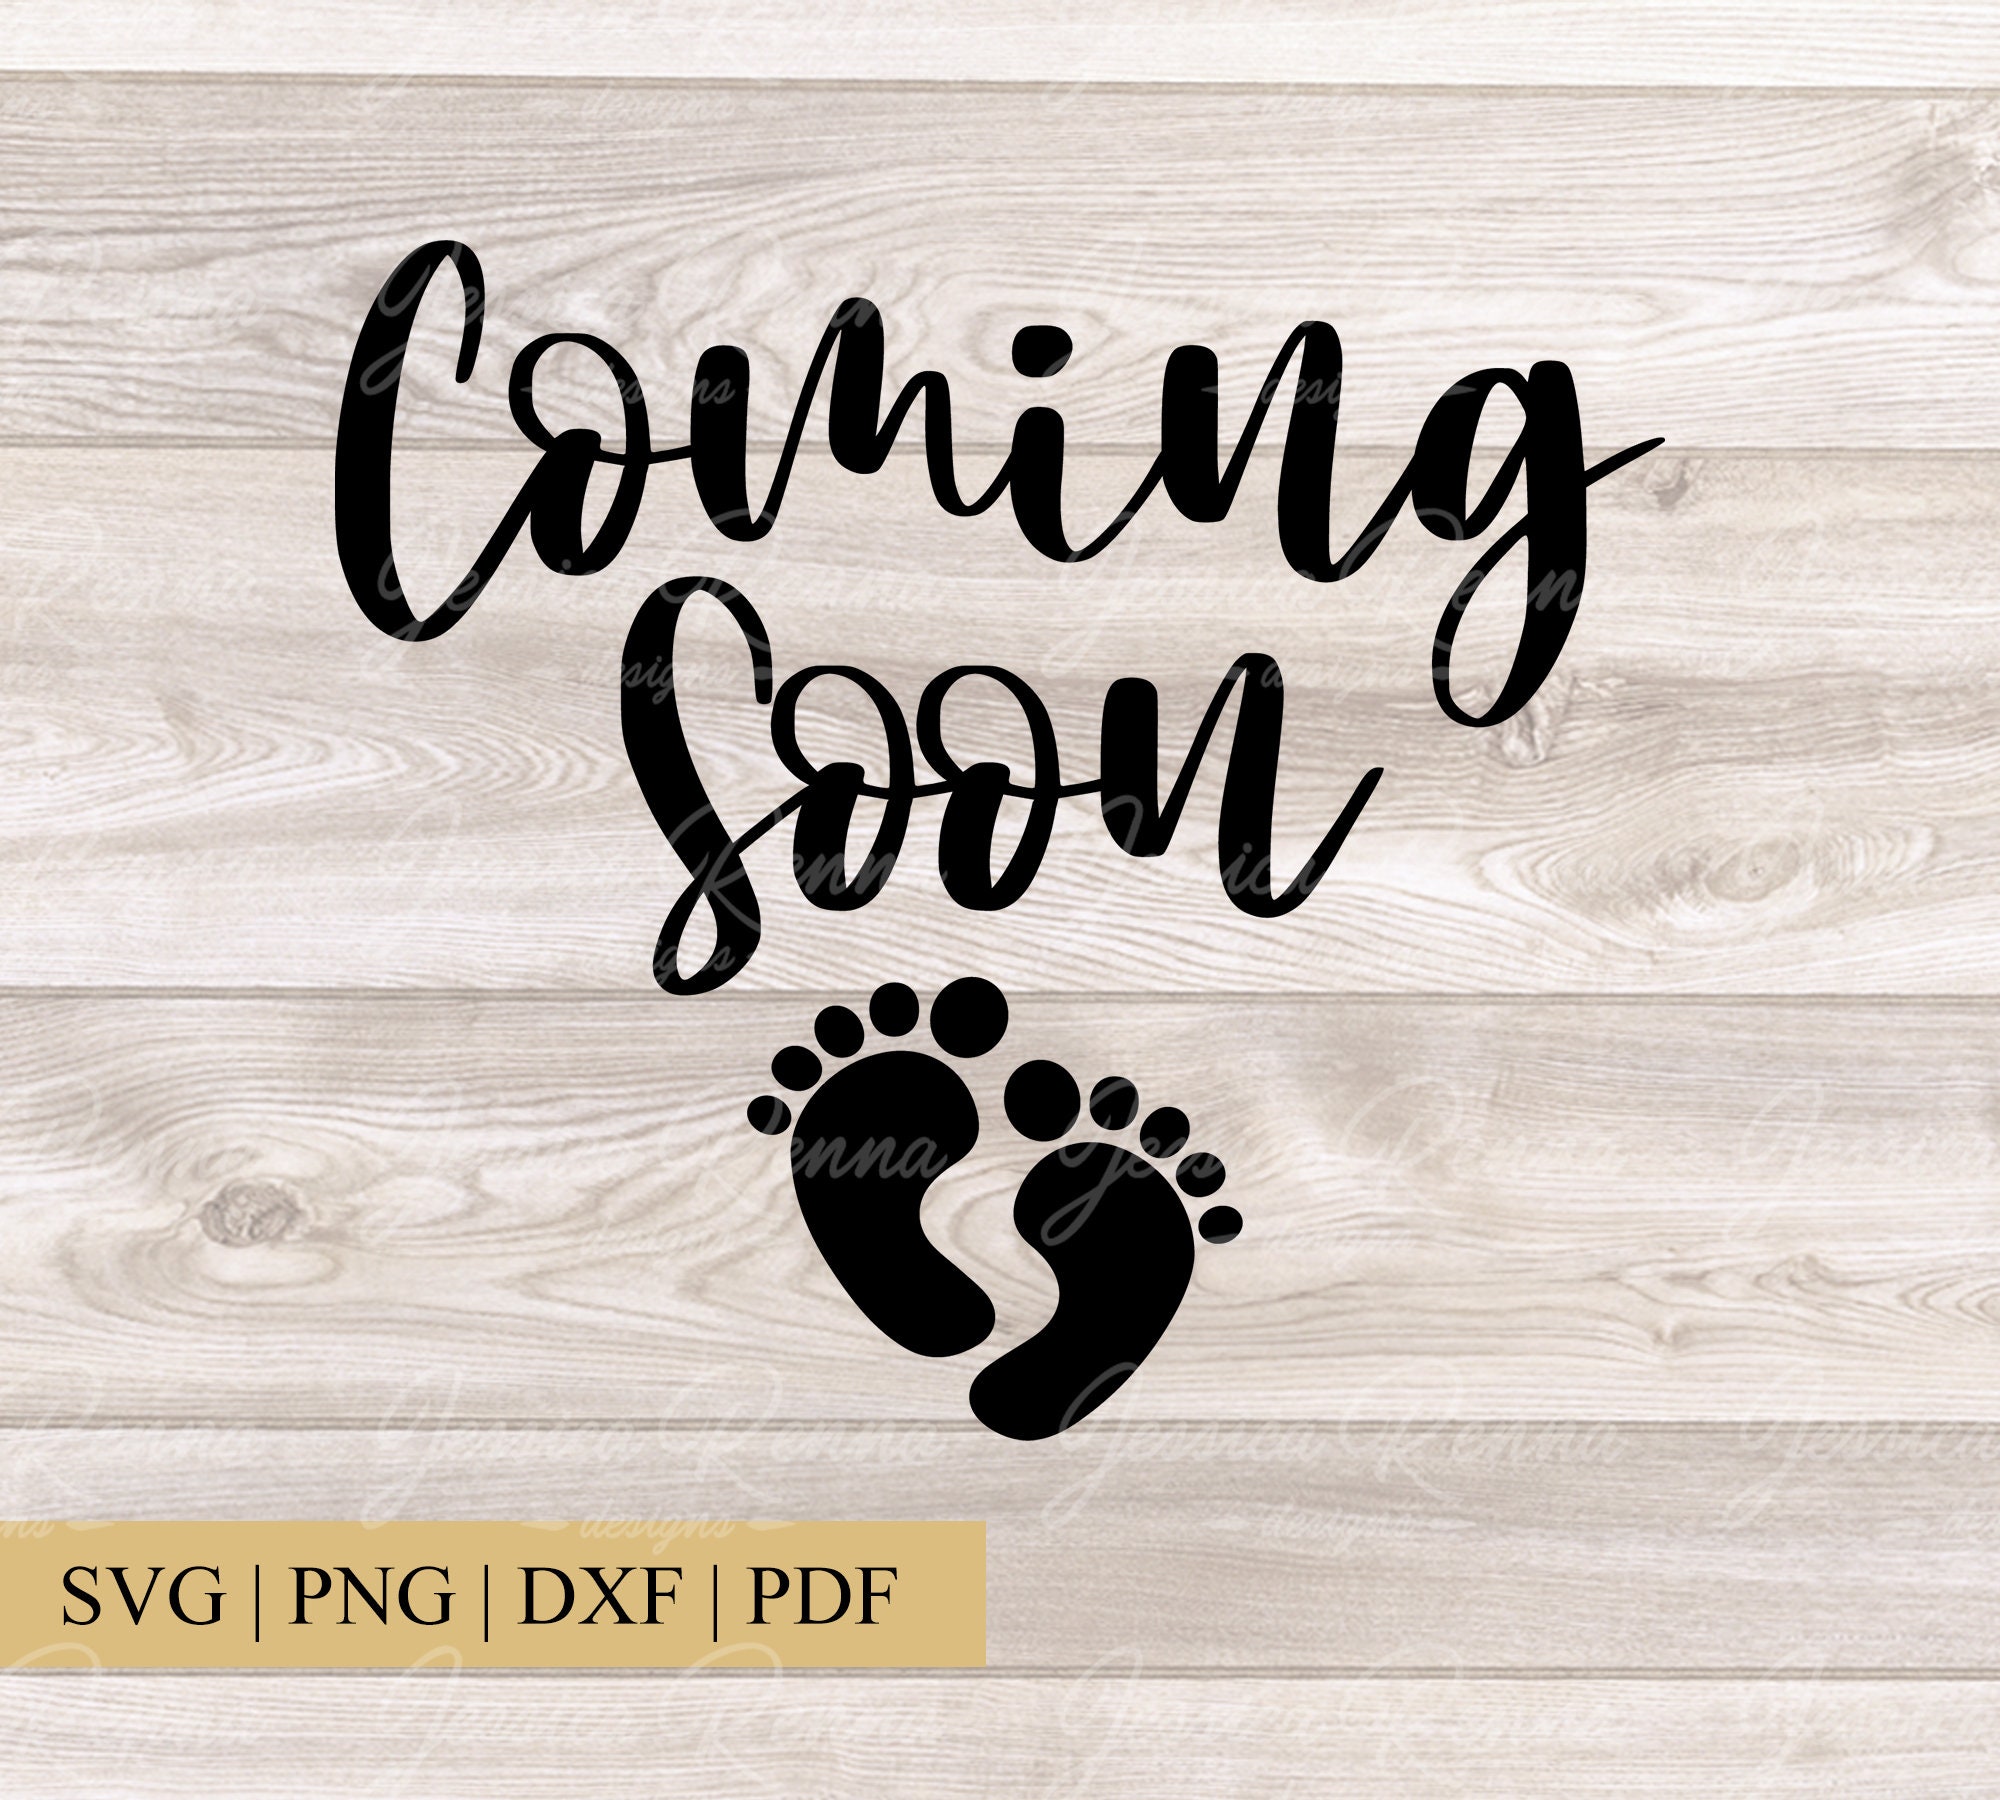 Baby Coming Soon SVG, Pregnancy Announcement SVG, Pregnancy Cut File,  Pregnancy Announcement T-shirt SVG 